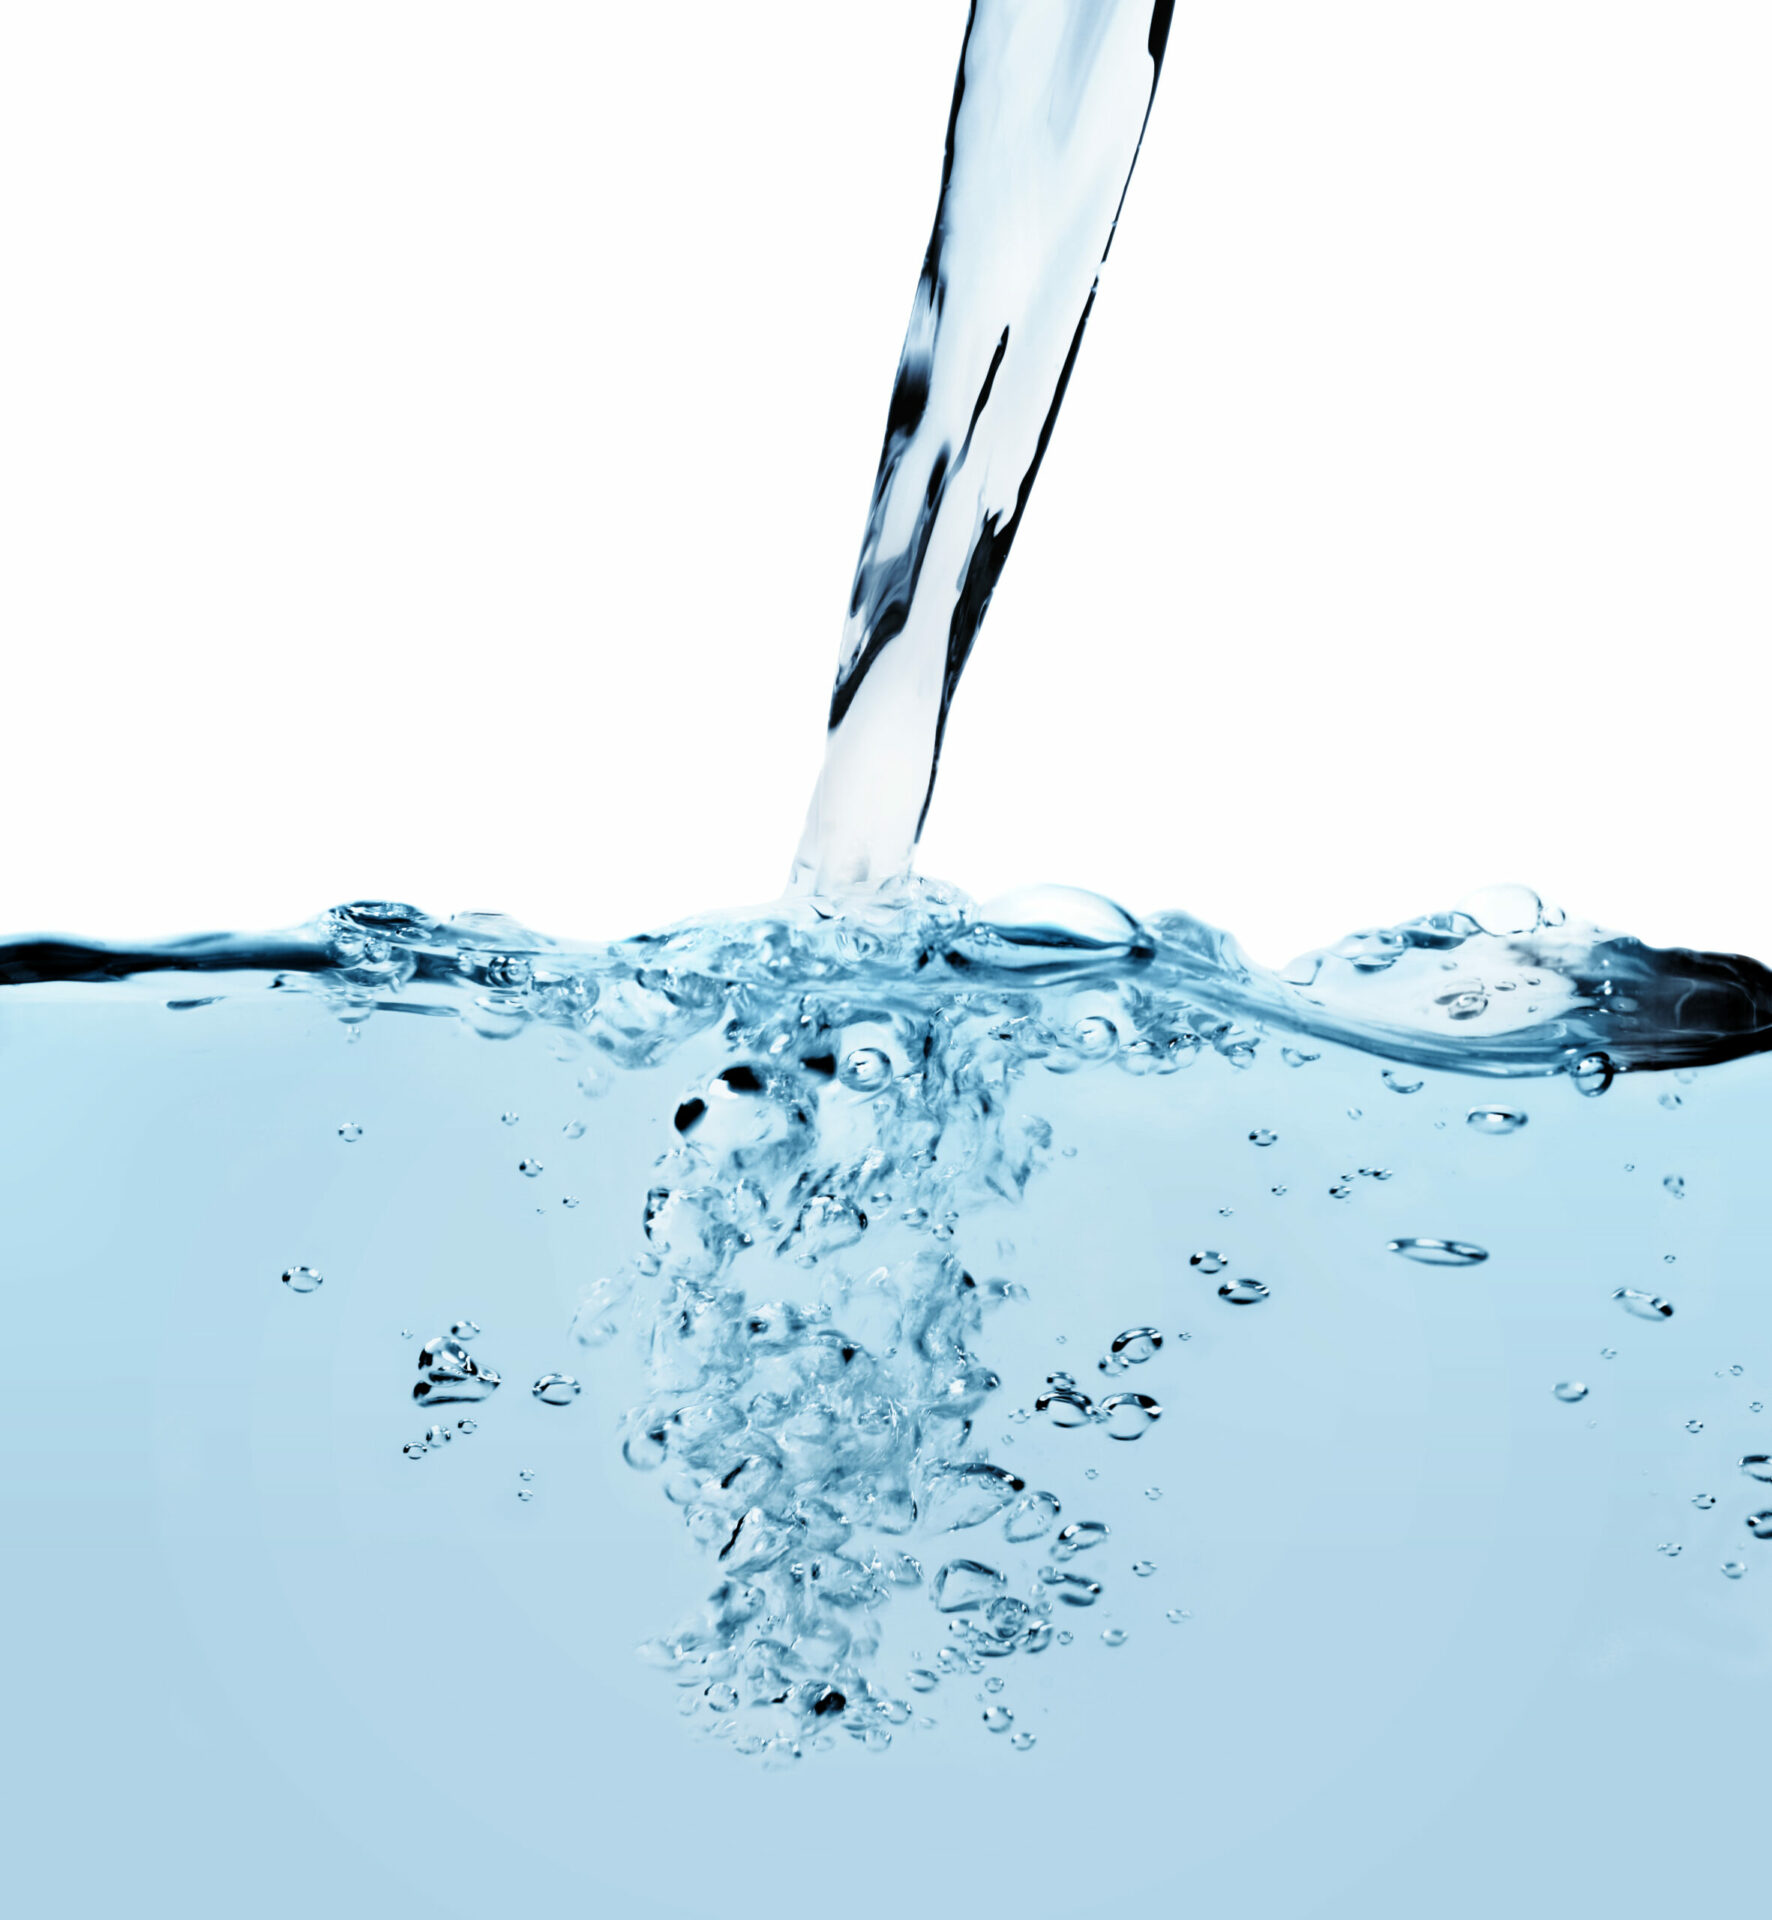 Read more about the article Drinking water is improving